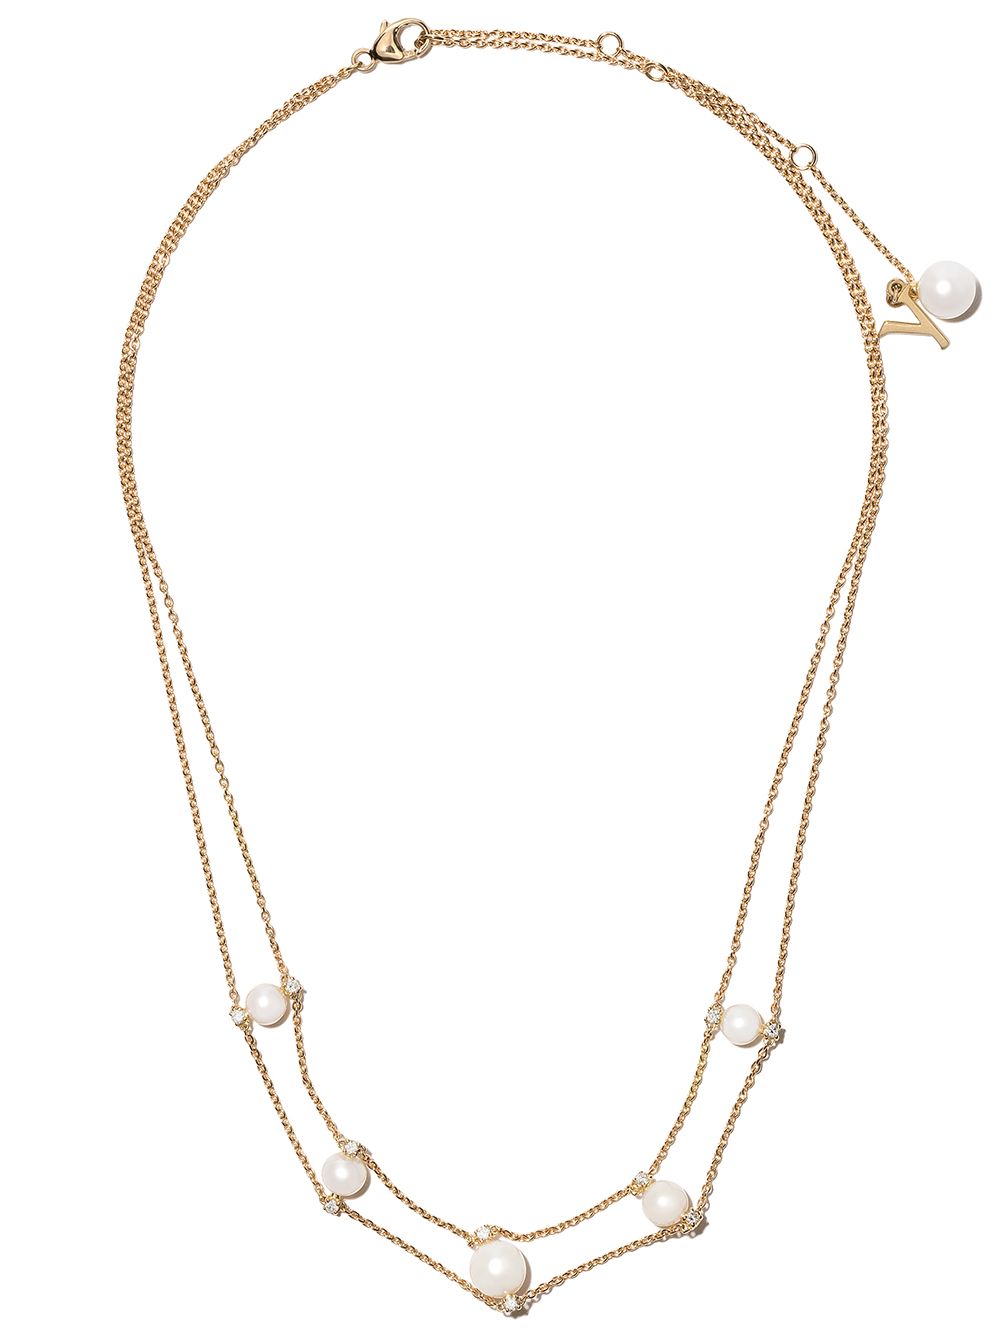 18kt yellow gold Trend Freshwater pearl and diamond necklace